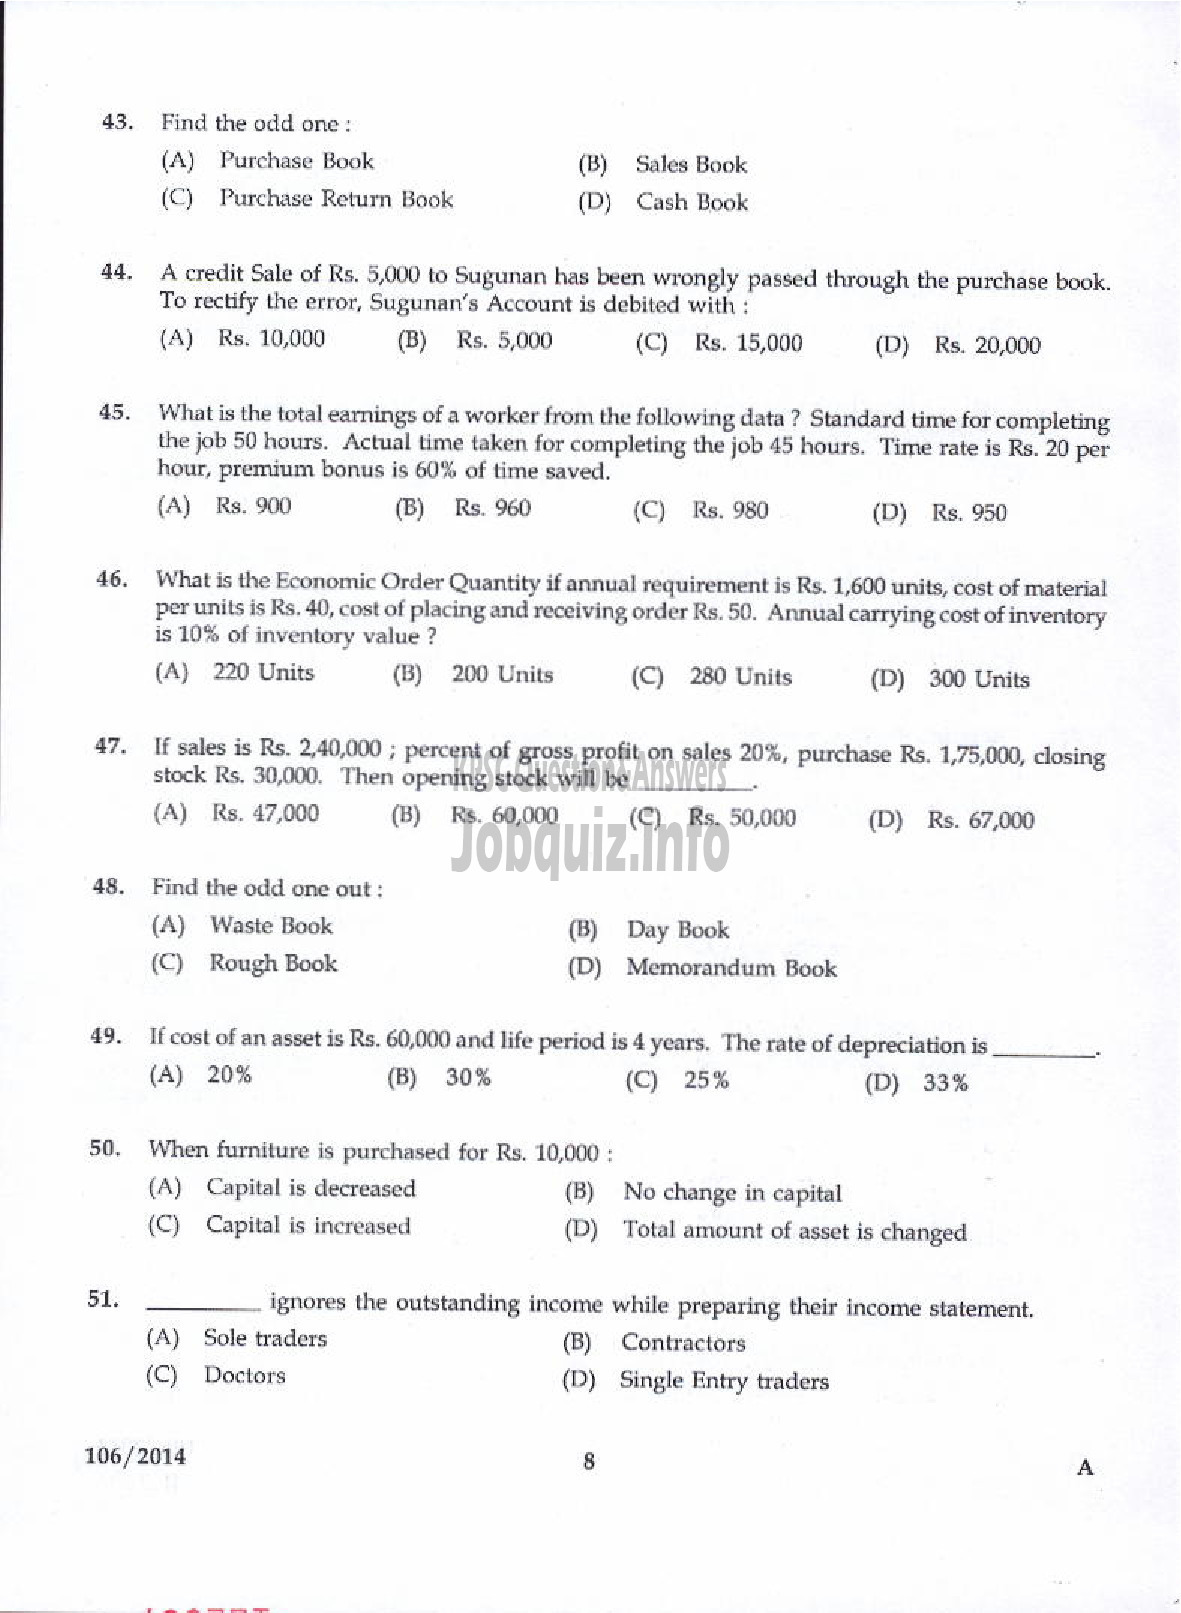 Kerala PSC Question Paper - DIVISIONAL ACCOUNTANT KERALA WATER AUTHORITY PRELIMINARY TEST-6